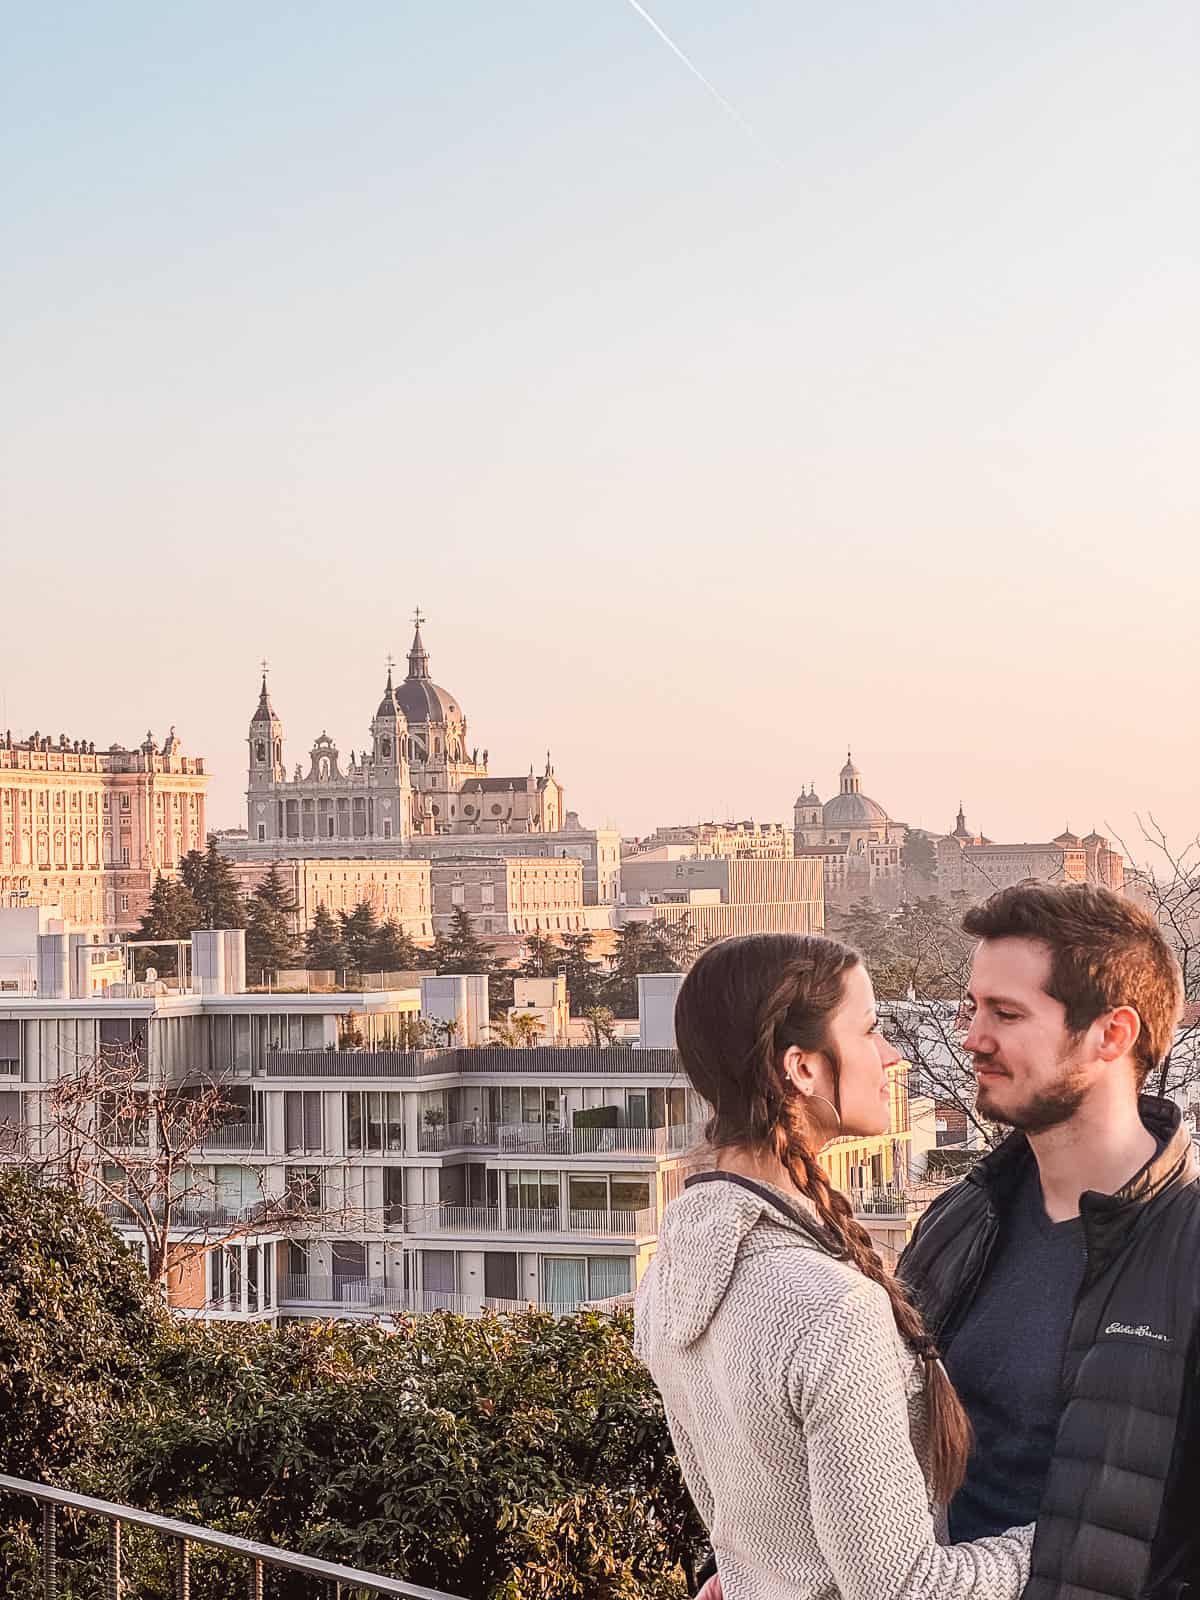 A couple shares a romantic moment with a scenic backdrop of the Almudena Cathedral in Madrid, captured during the golden hour, highlighting the city's historic architecture and serene skies